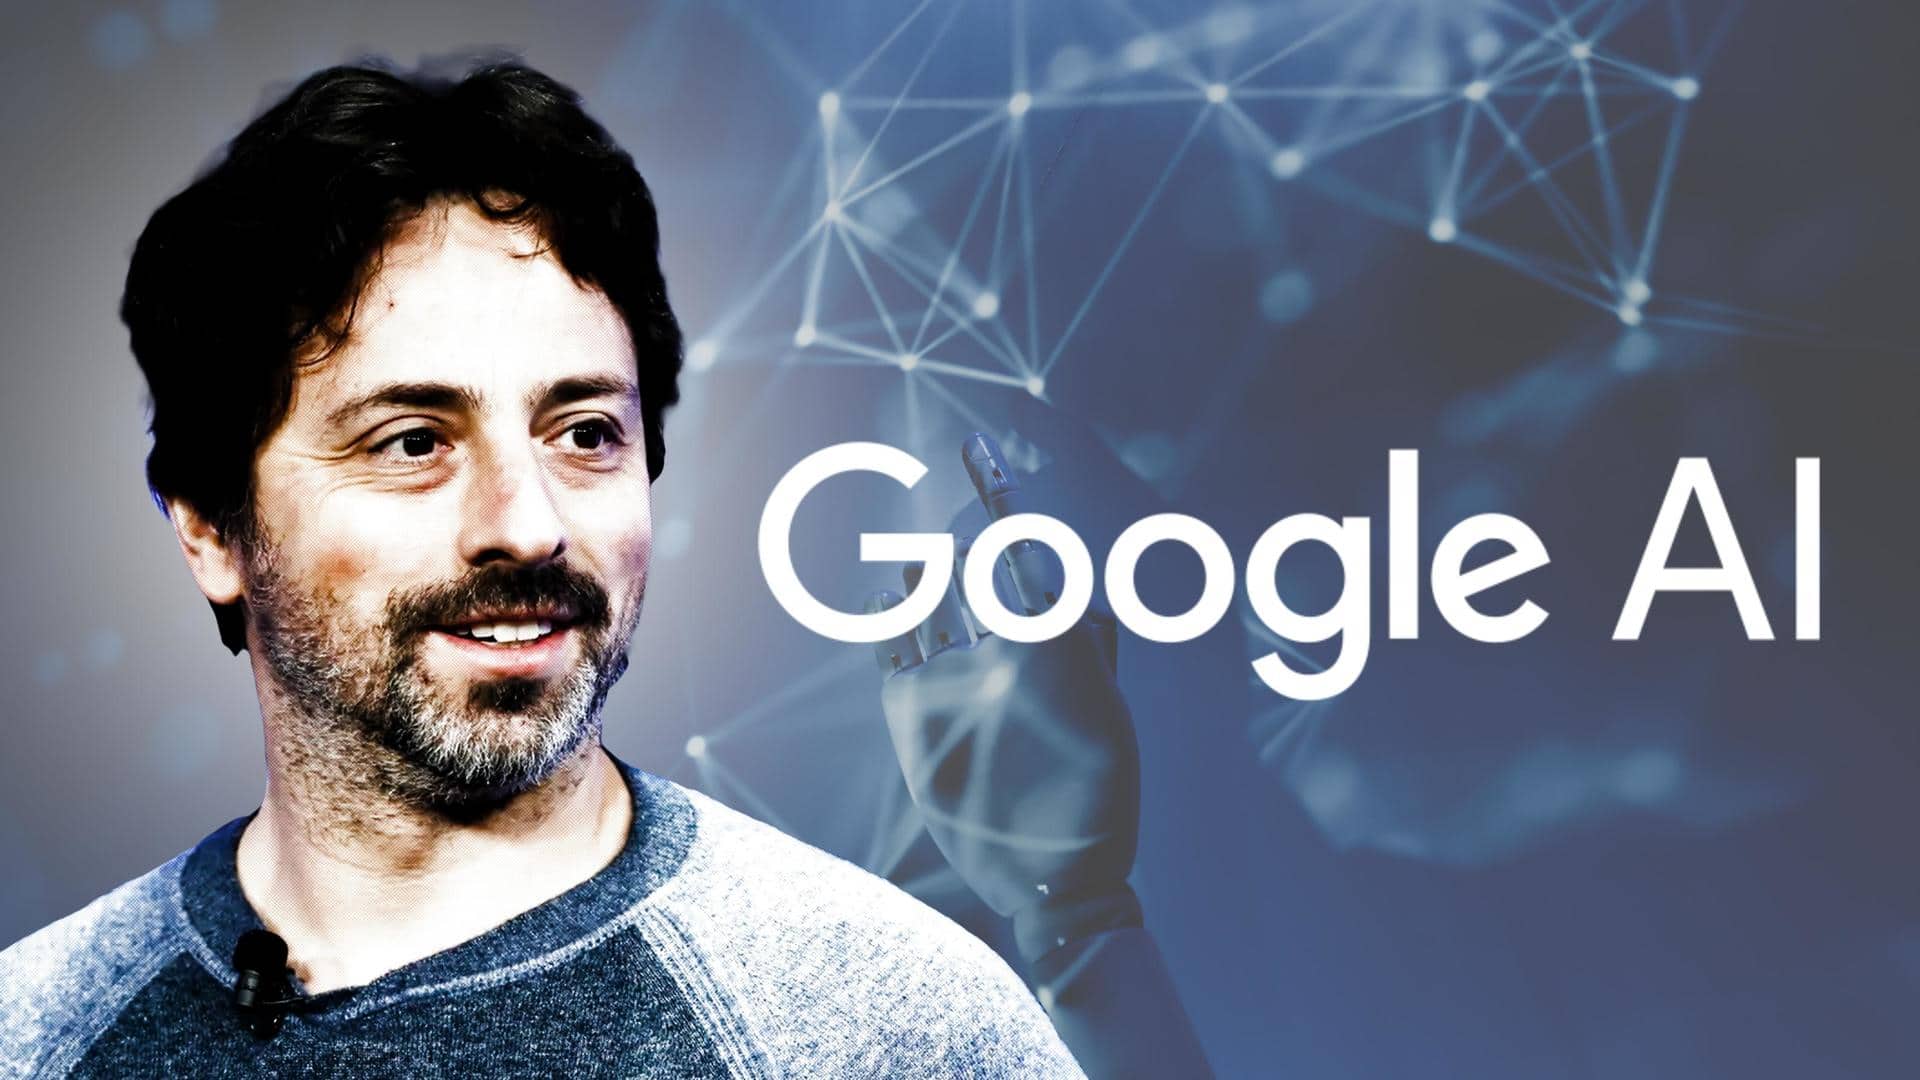 Sergey Brin is back at Google to help AI endeavors